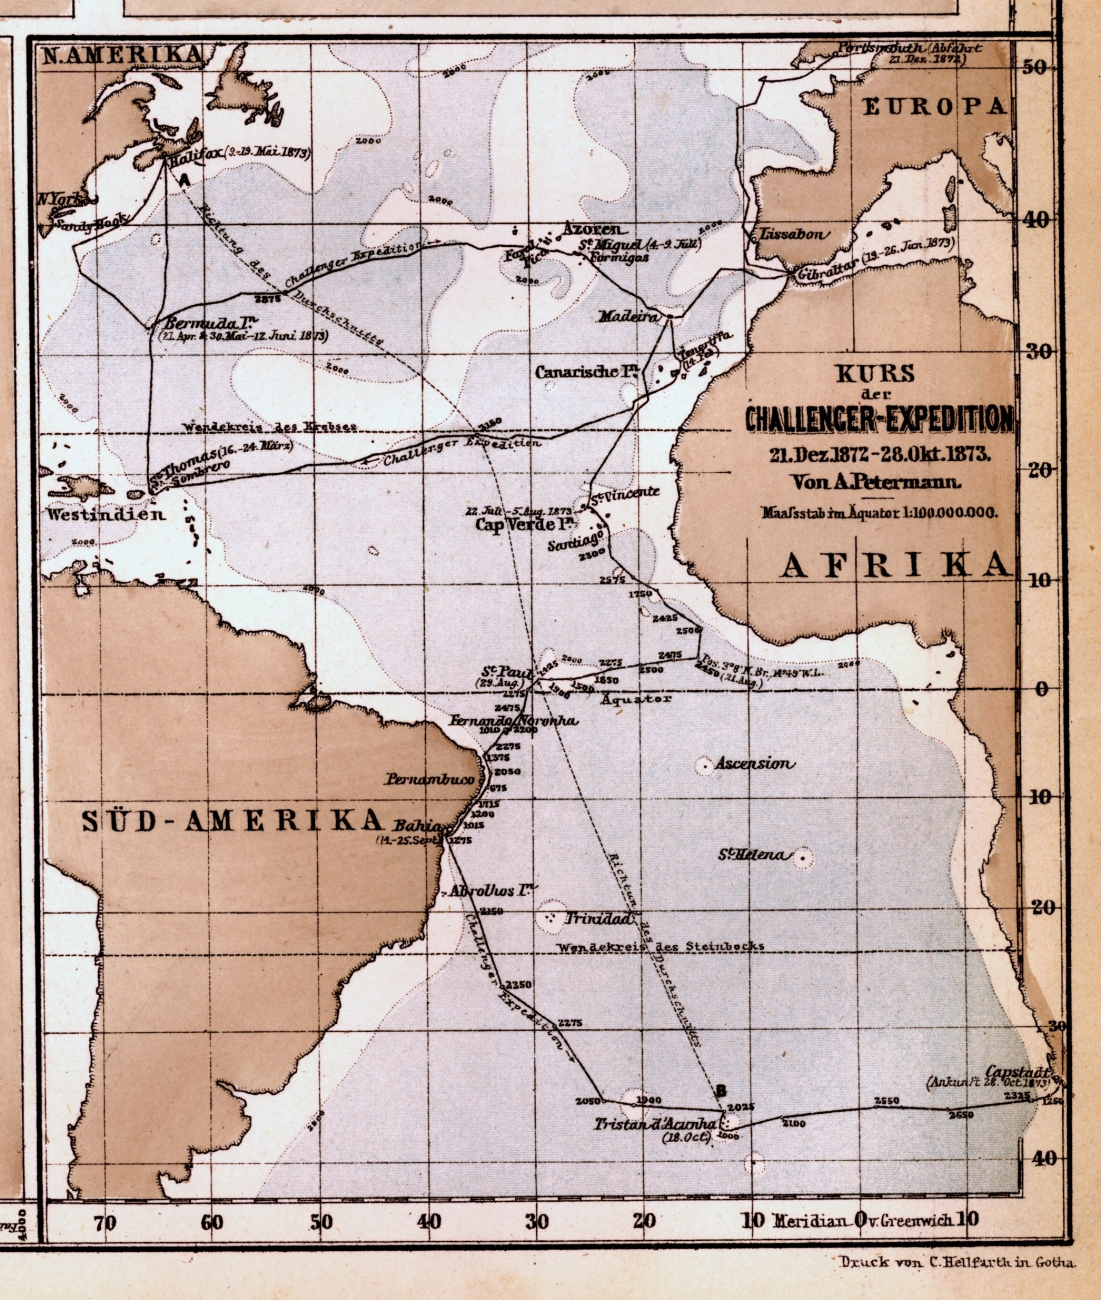 Map of the Atlantic Ocean published after the outward bound segment of theCHALLENGER Expedition